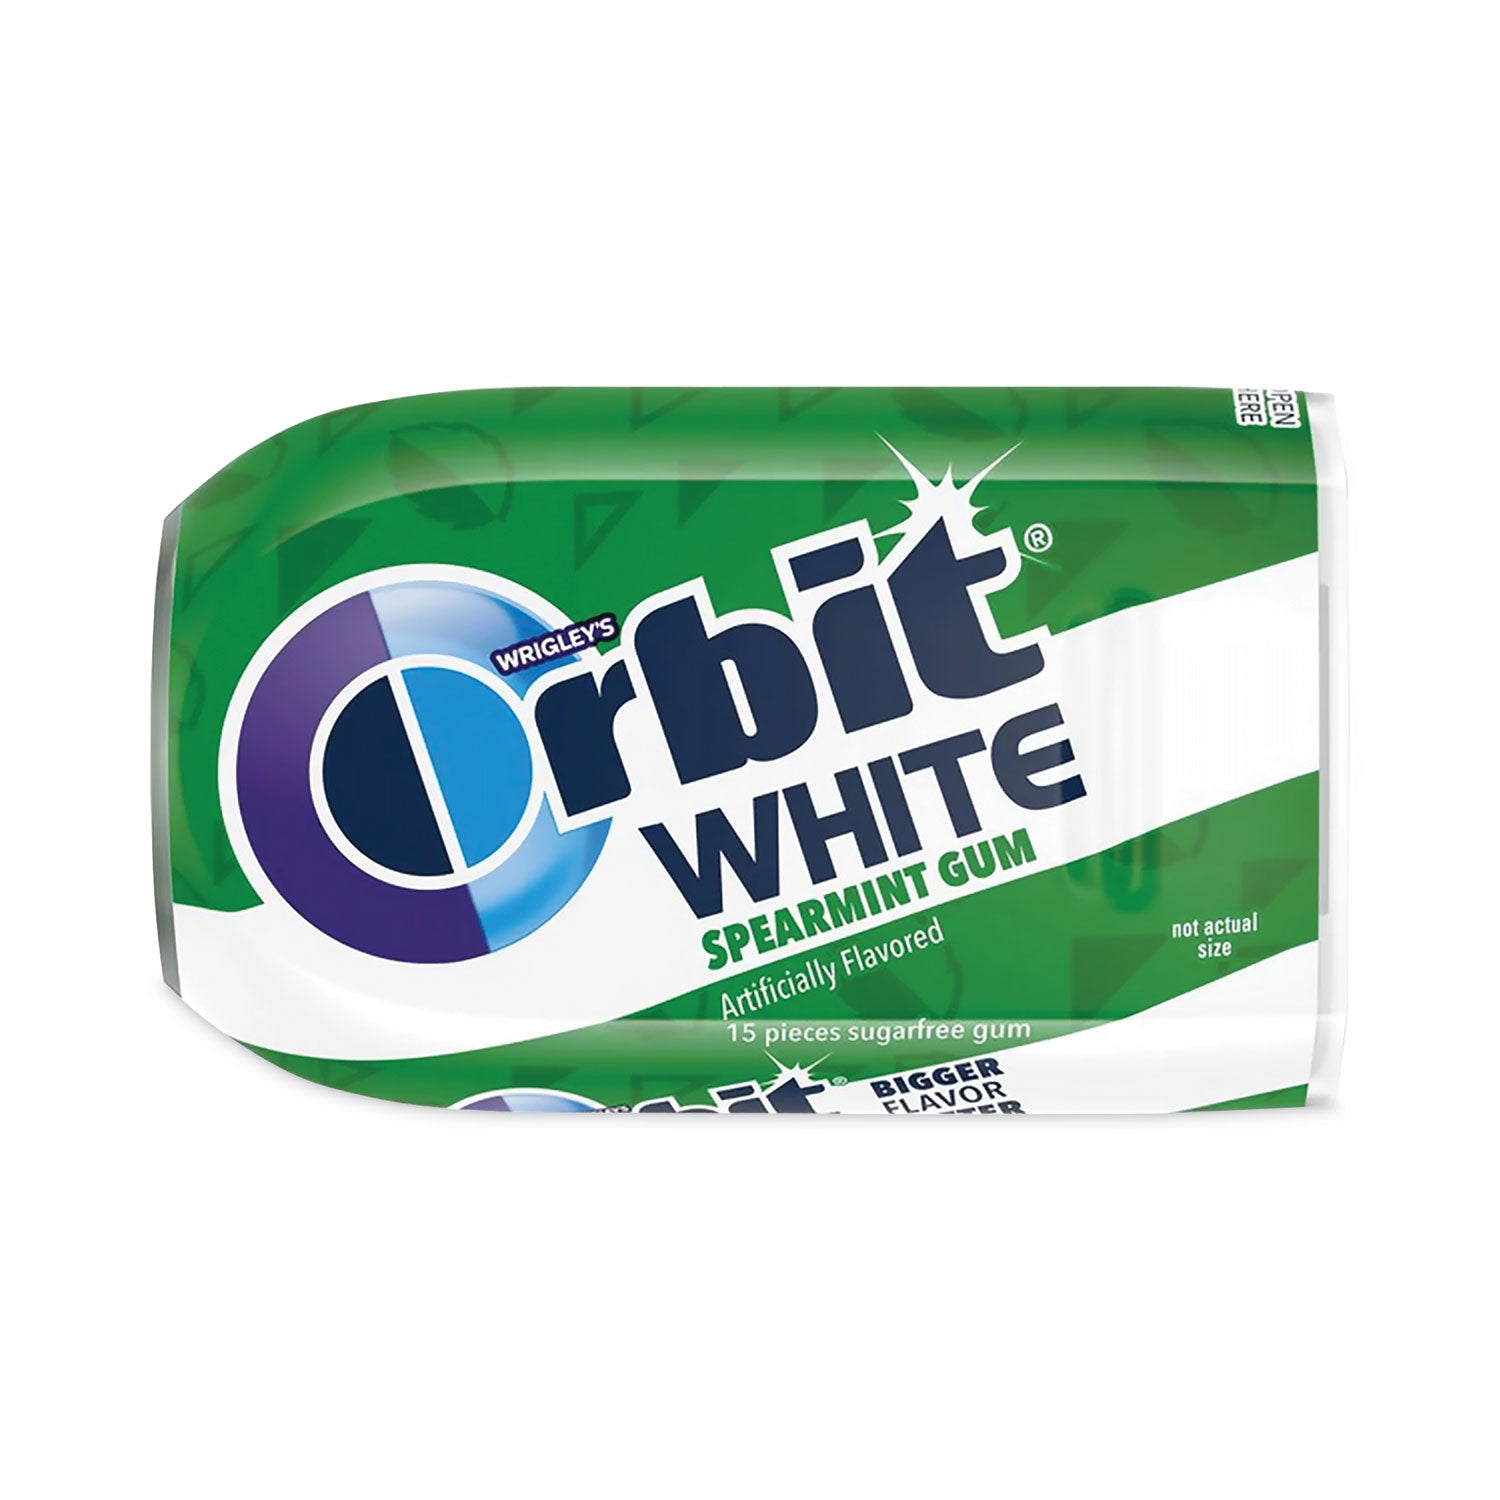 white-sugar-free-gum-spearmint-15-pieces-pack-9-packs-carton-ships-in-1-3-business-days_grr20902548 - 1